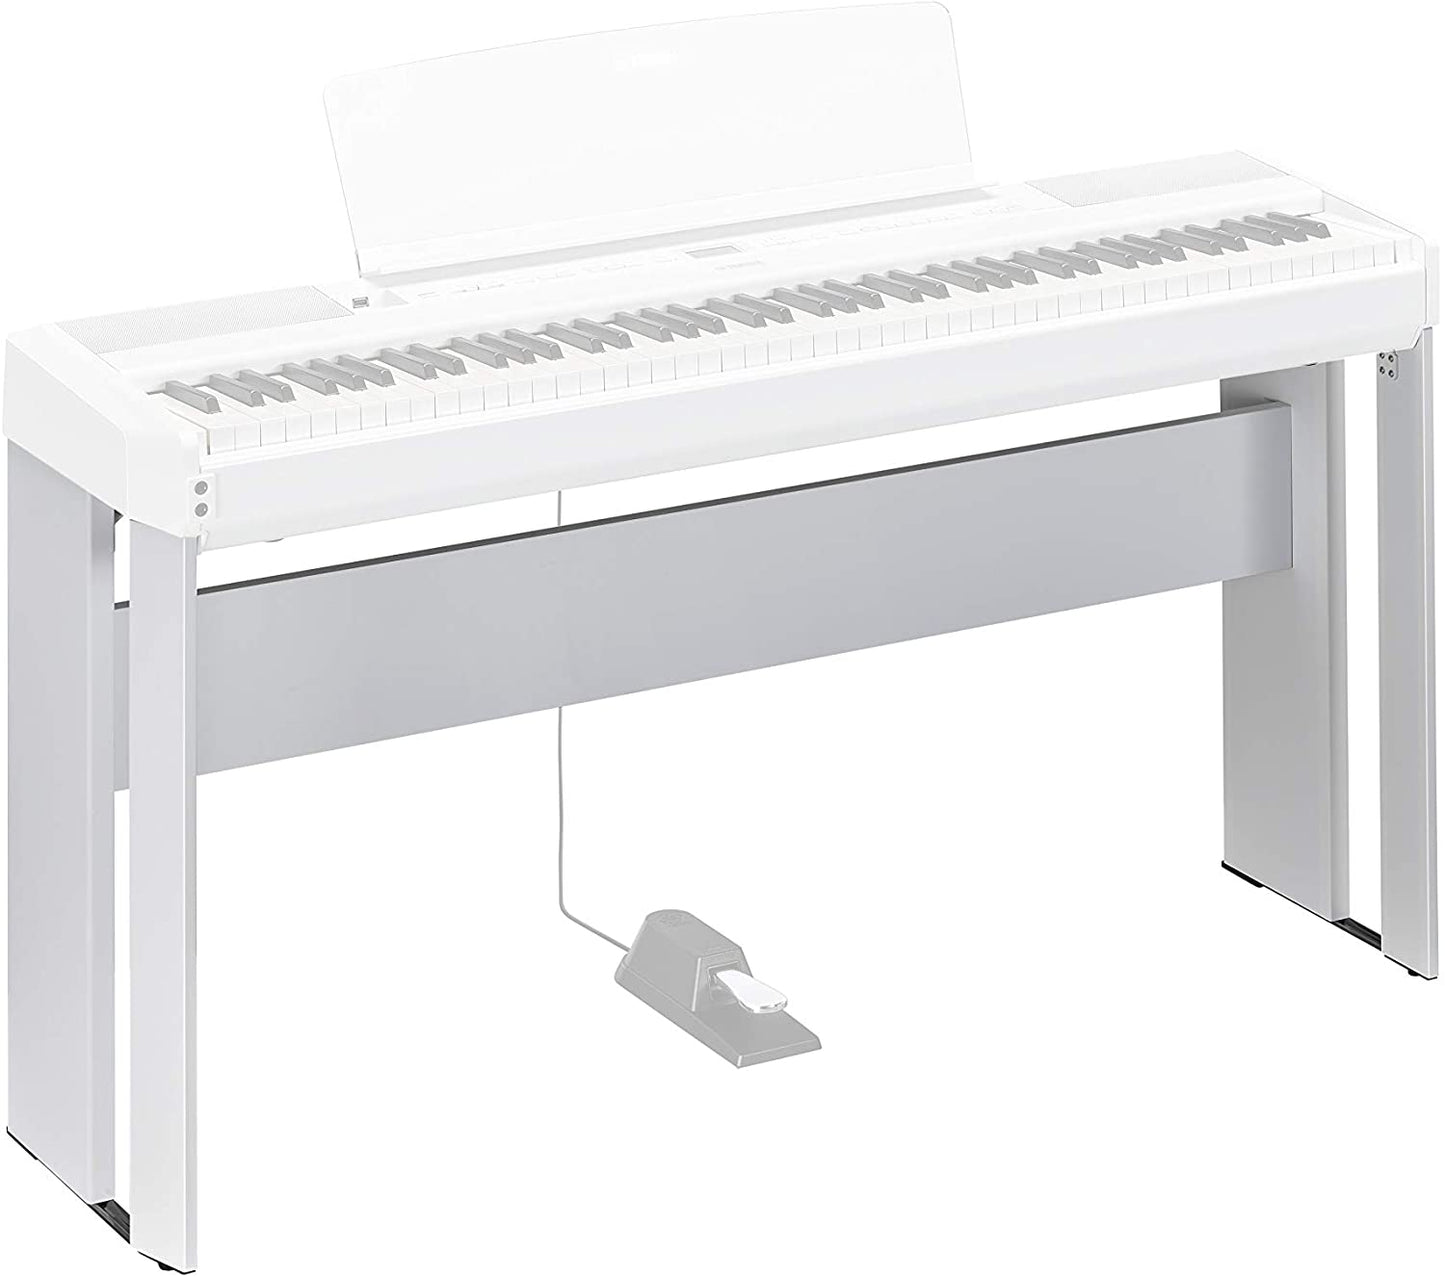 Yamaha L515 Furniture Stand for P515 Piano - Black or White